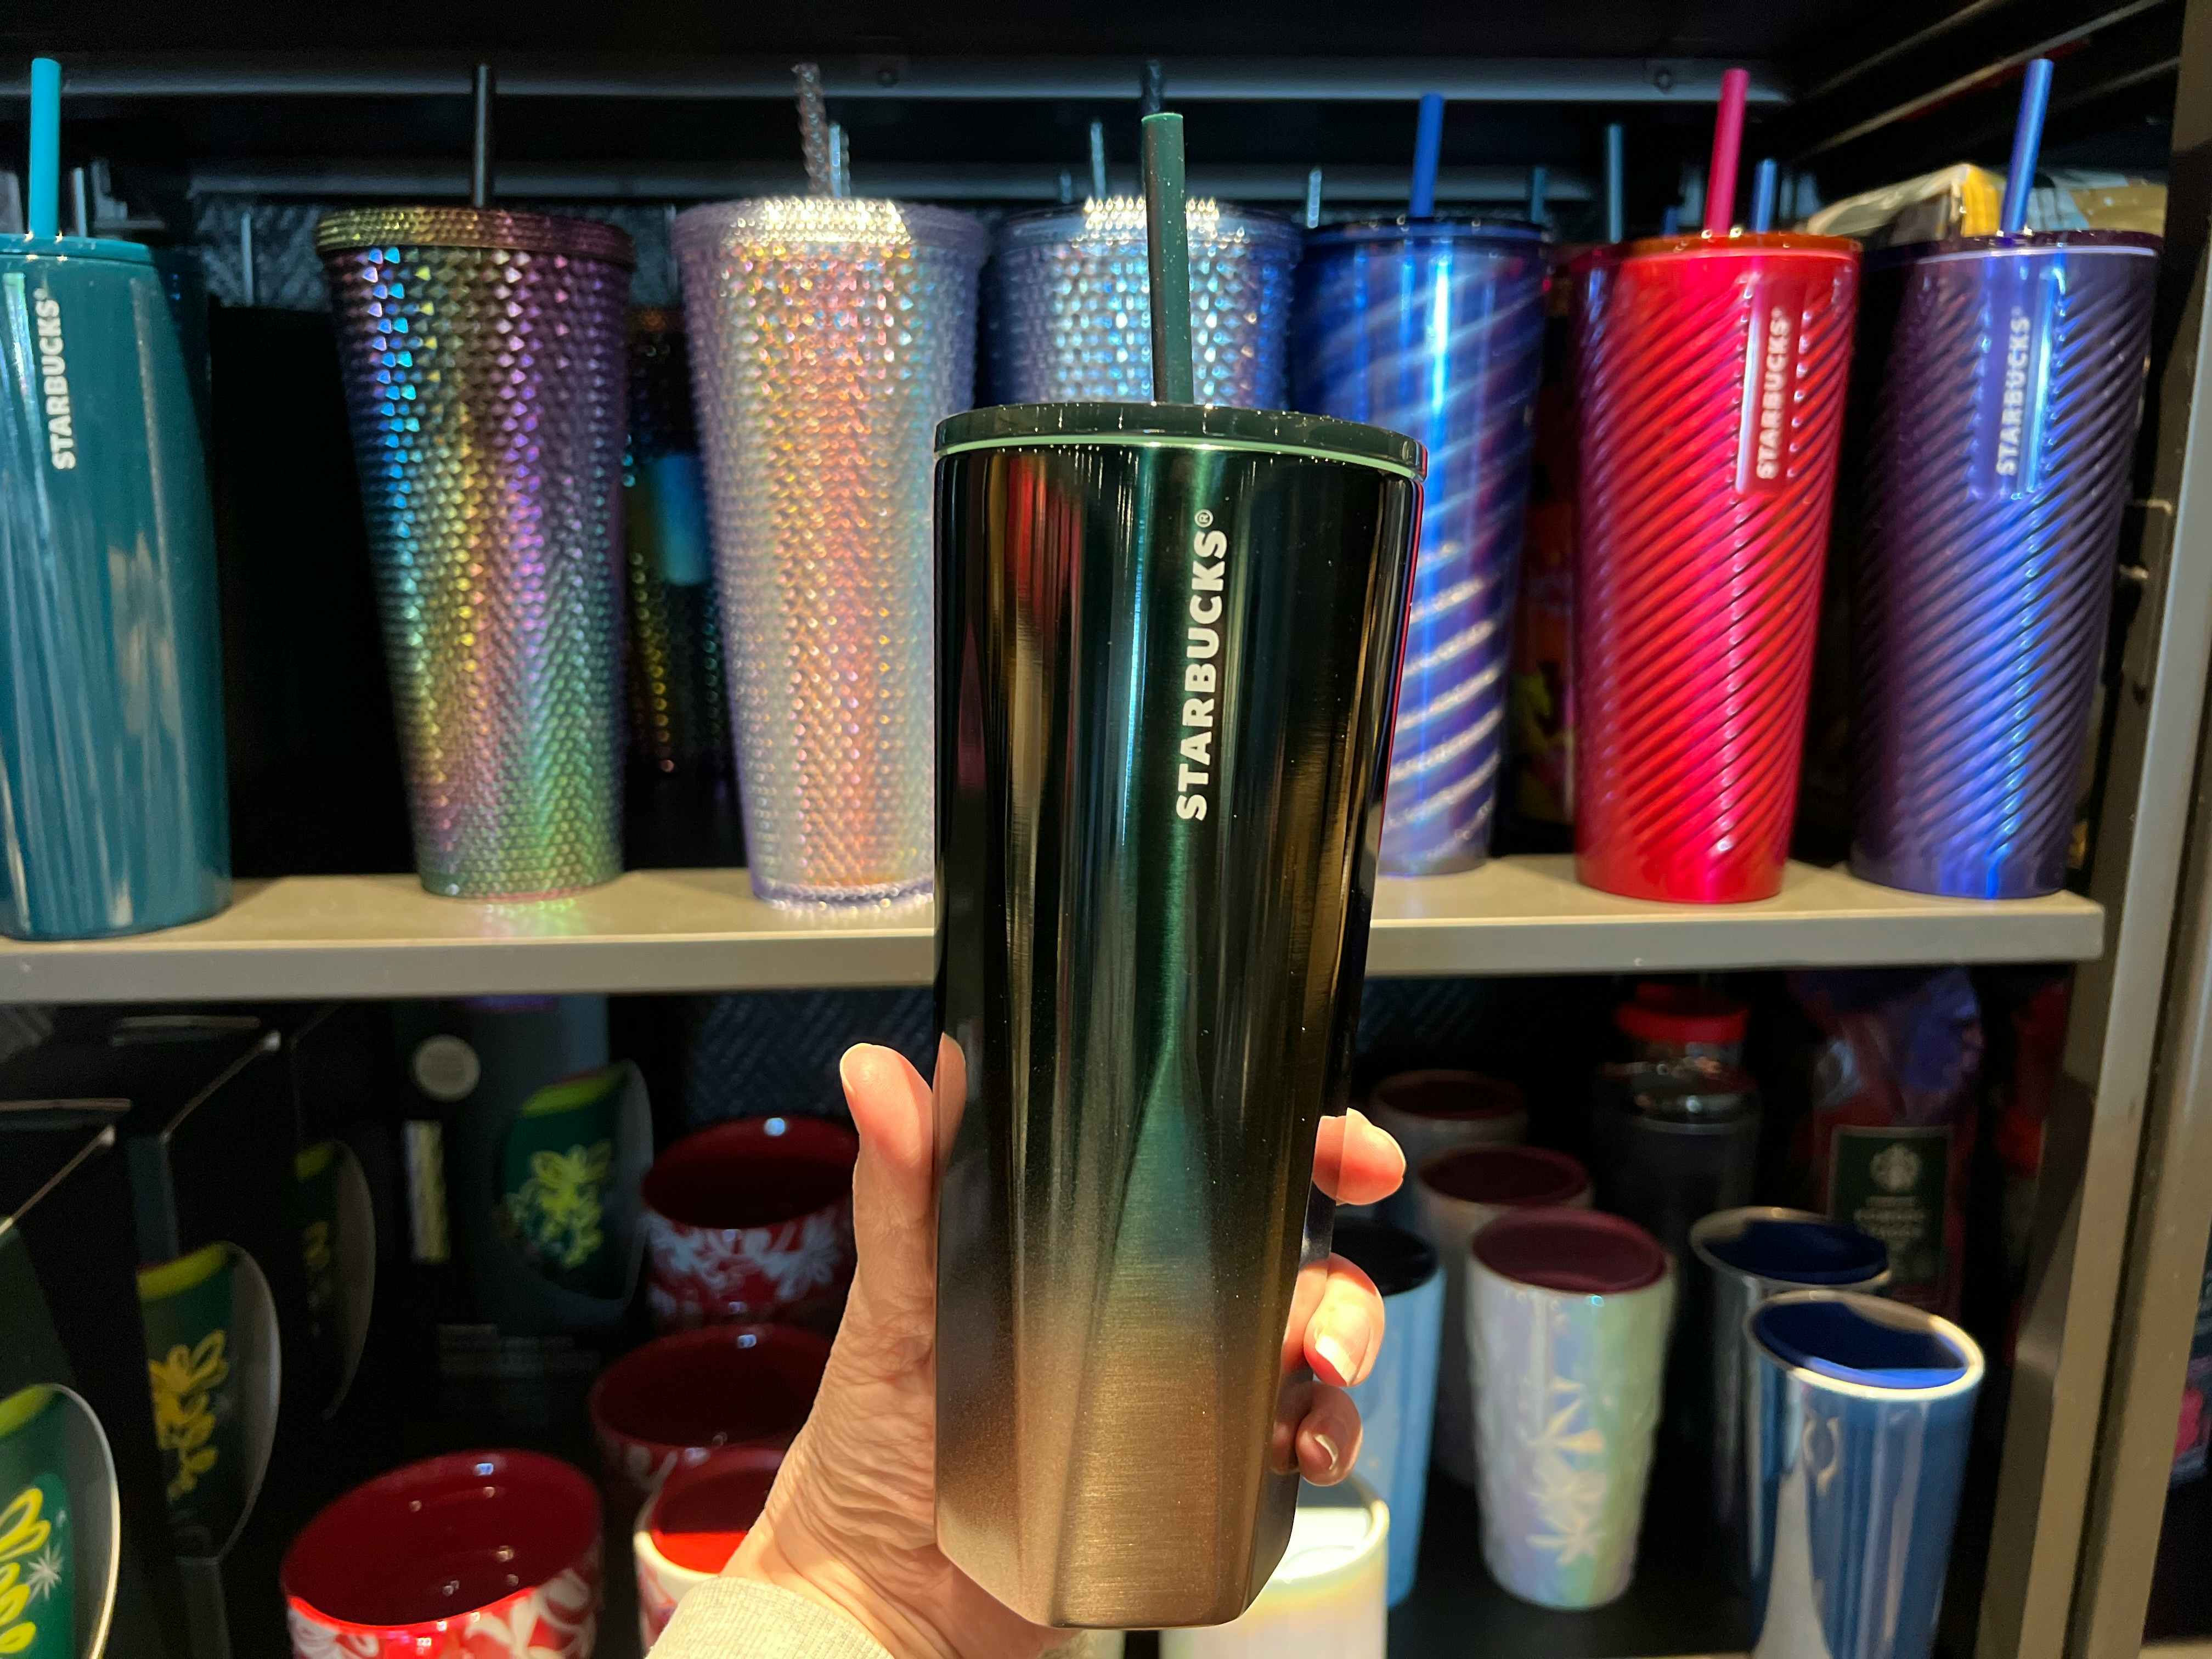 https://prod-cdn-thekrazycouponlady.imgix.net/wp-content/uploads/2023/12/starbucks-winter-cups-green-gold-ombre-tumbler-1701974041-1701974041.jpg?auto=format&fit=fill&q=25